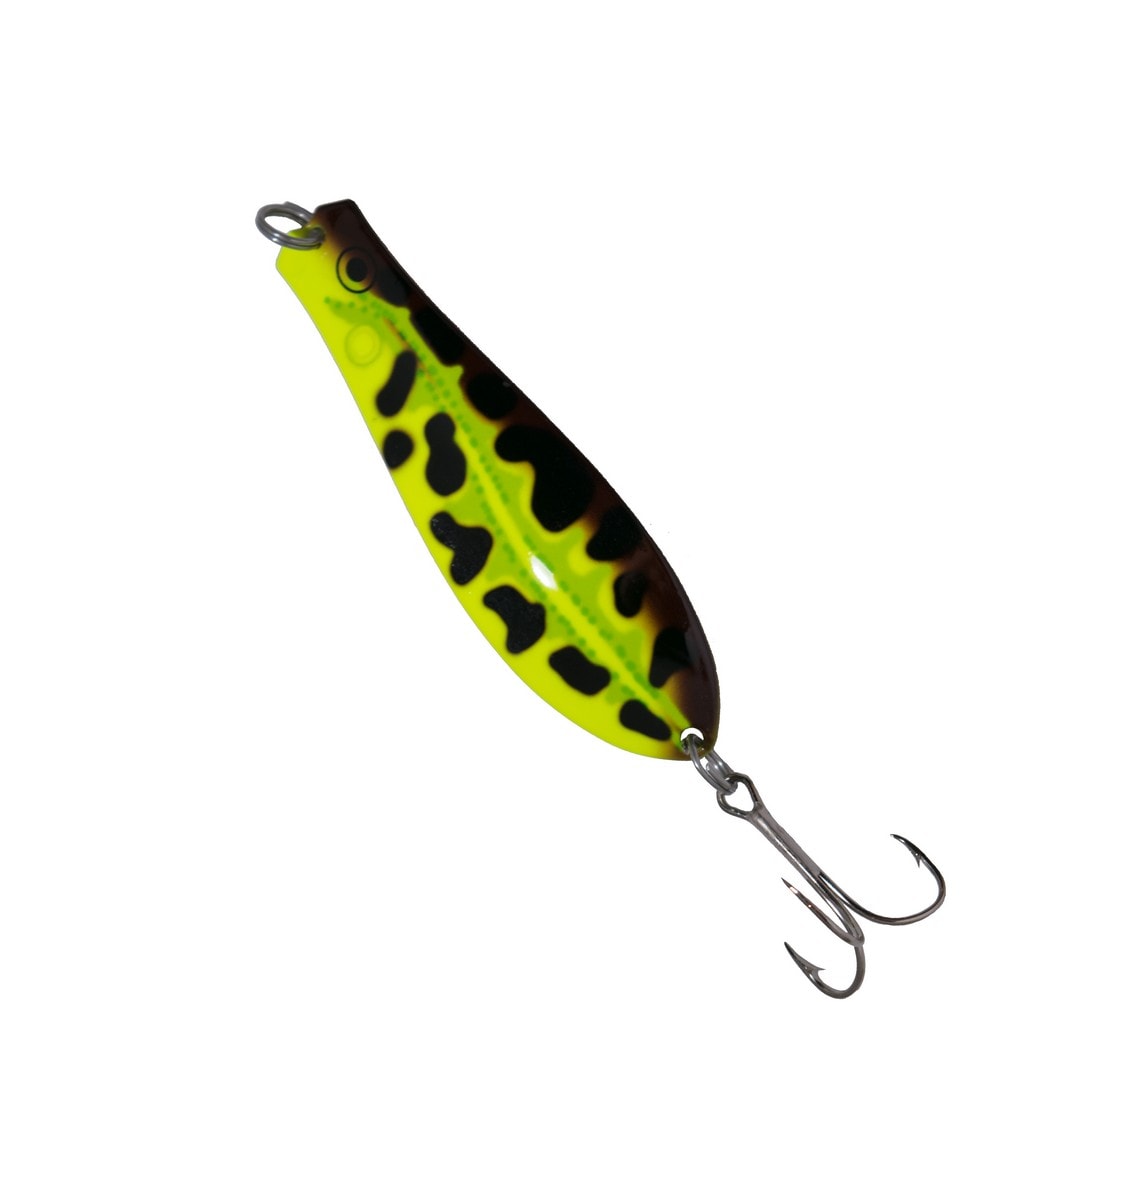 Doctor Spoon in (41) Frog - Yellow Bird Fishing Products